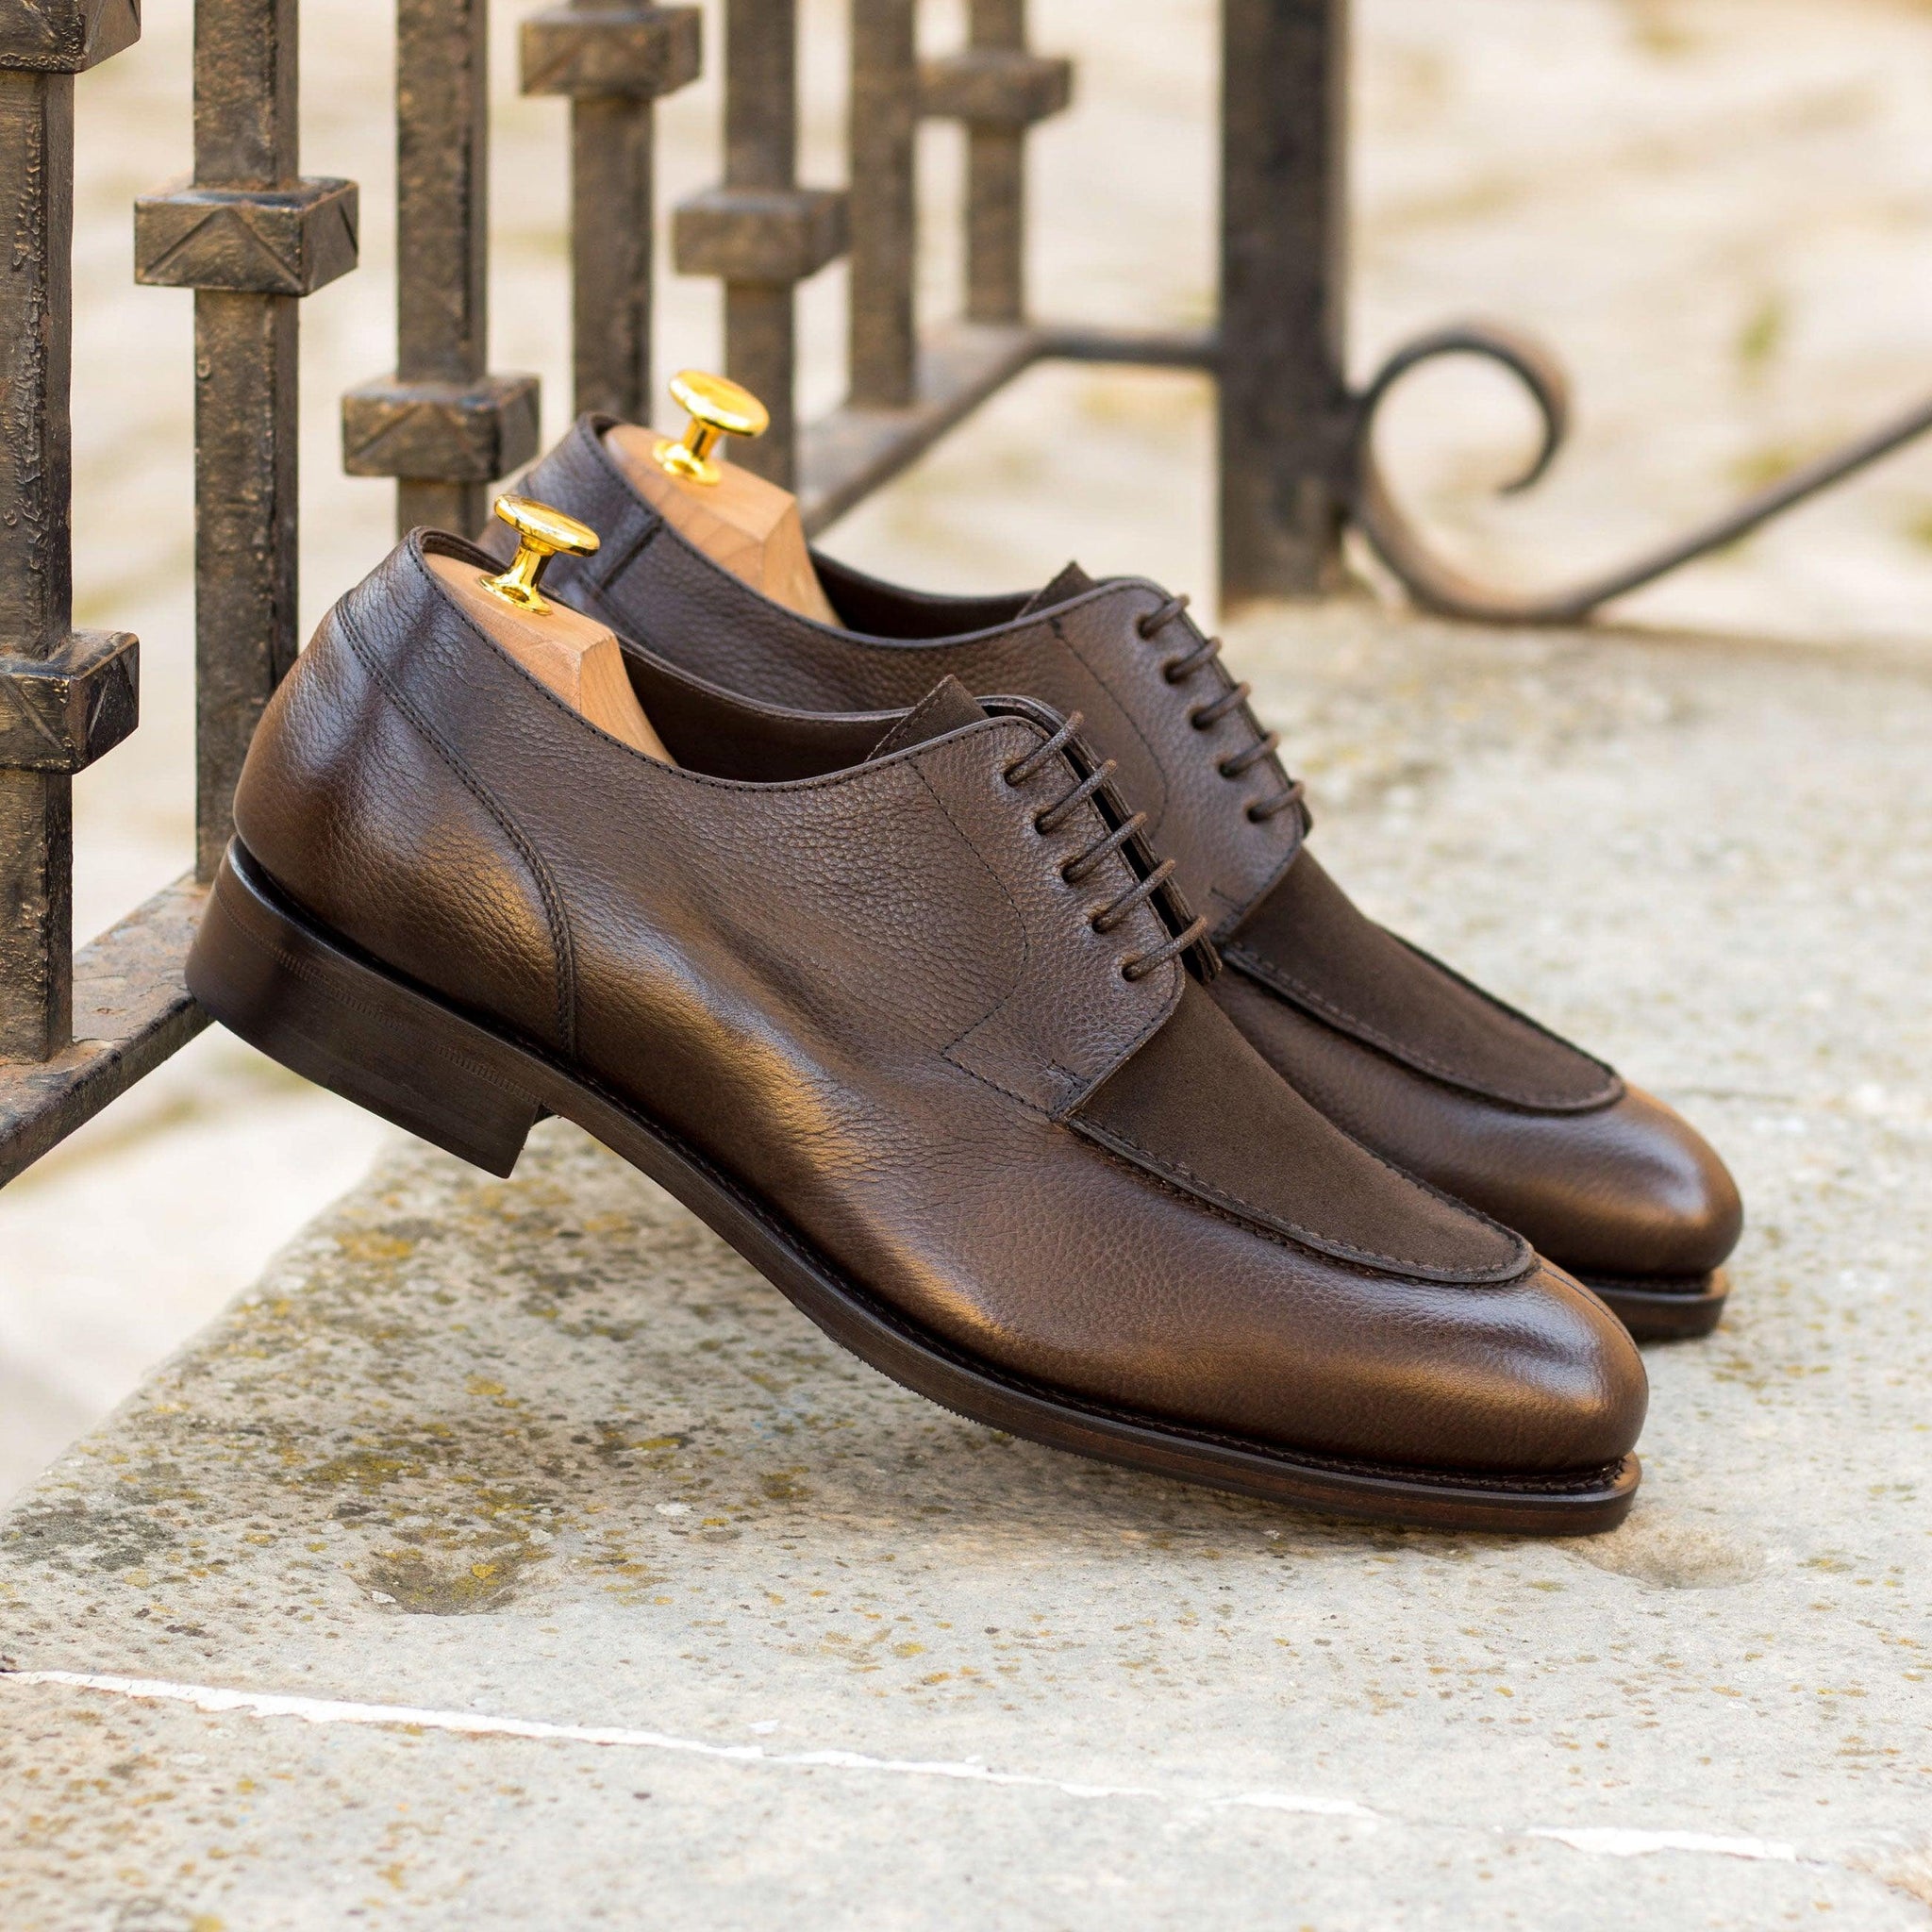 Handmade Derby Shoes for Men in Dark Brown Calf Leather 8